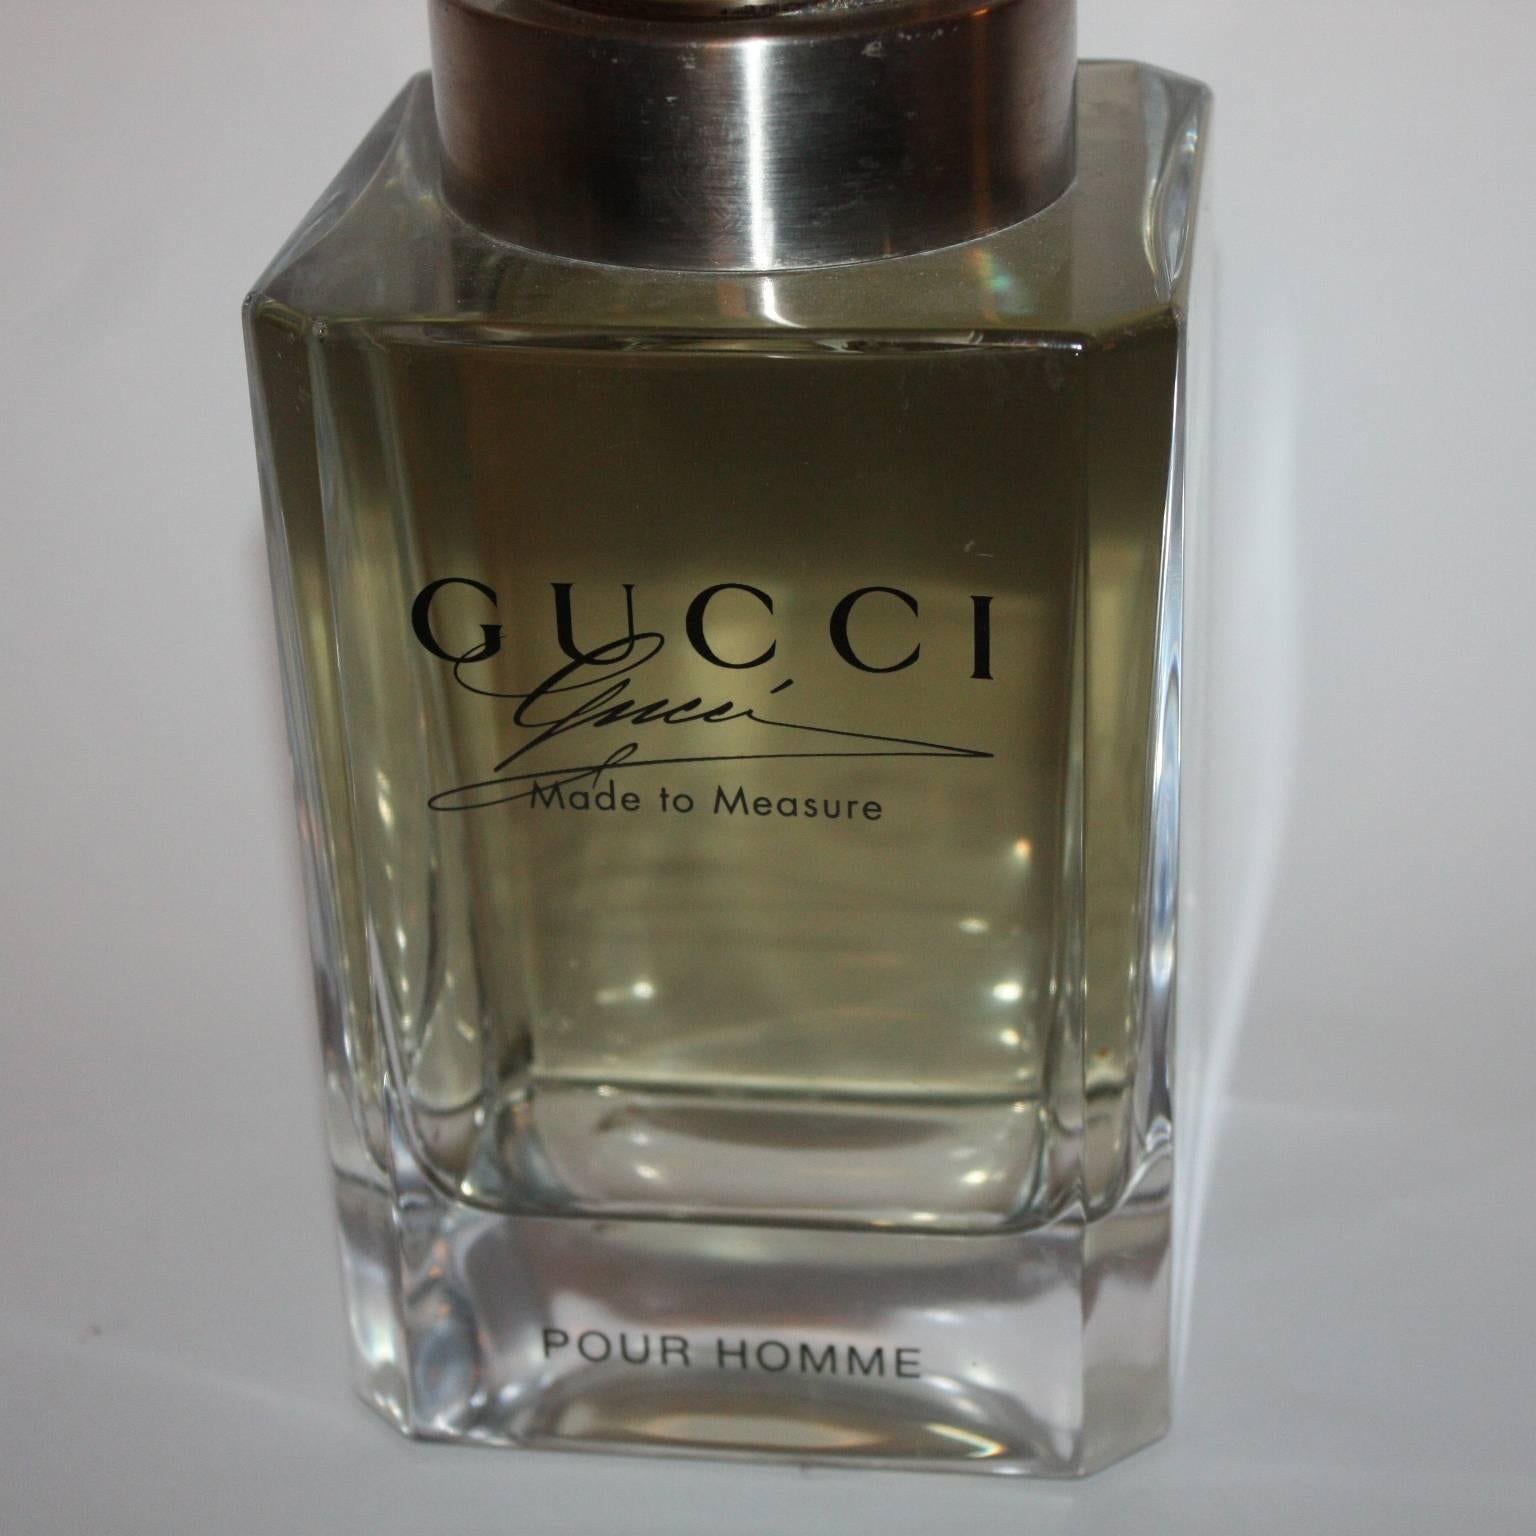 Decorative shop display Gucci perfume bottle with a brass top engraved Gucci, Italian, 1980s.